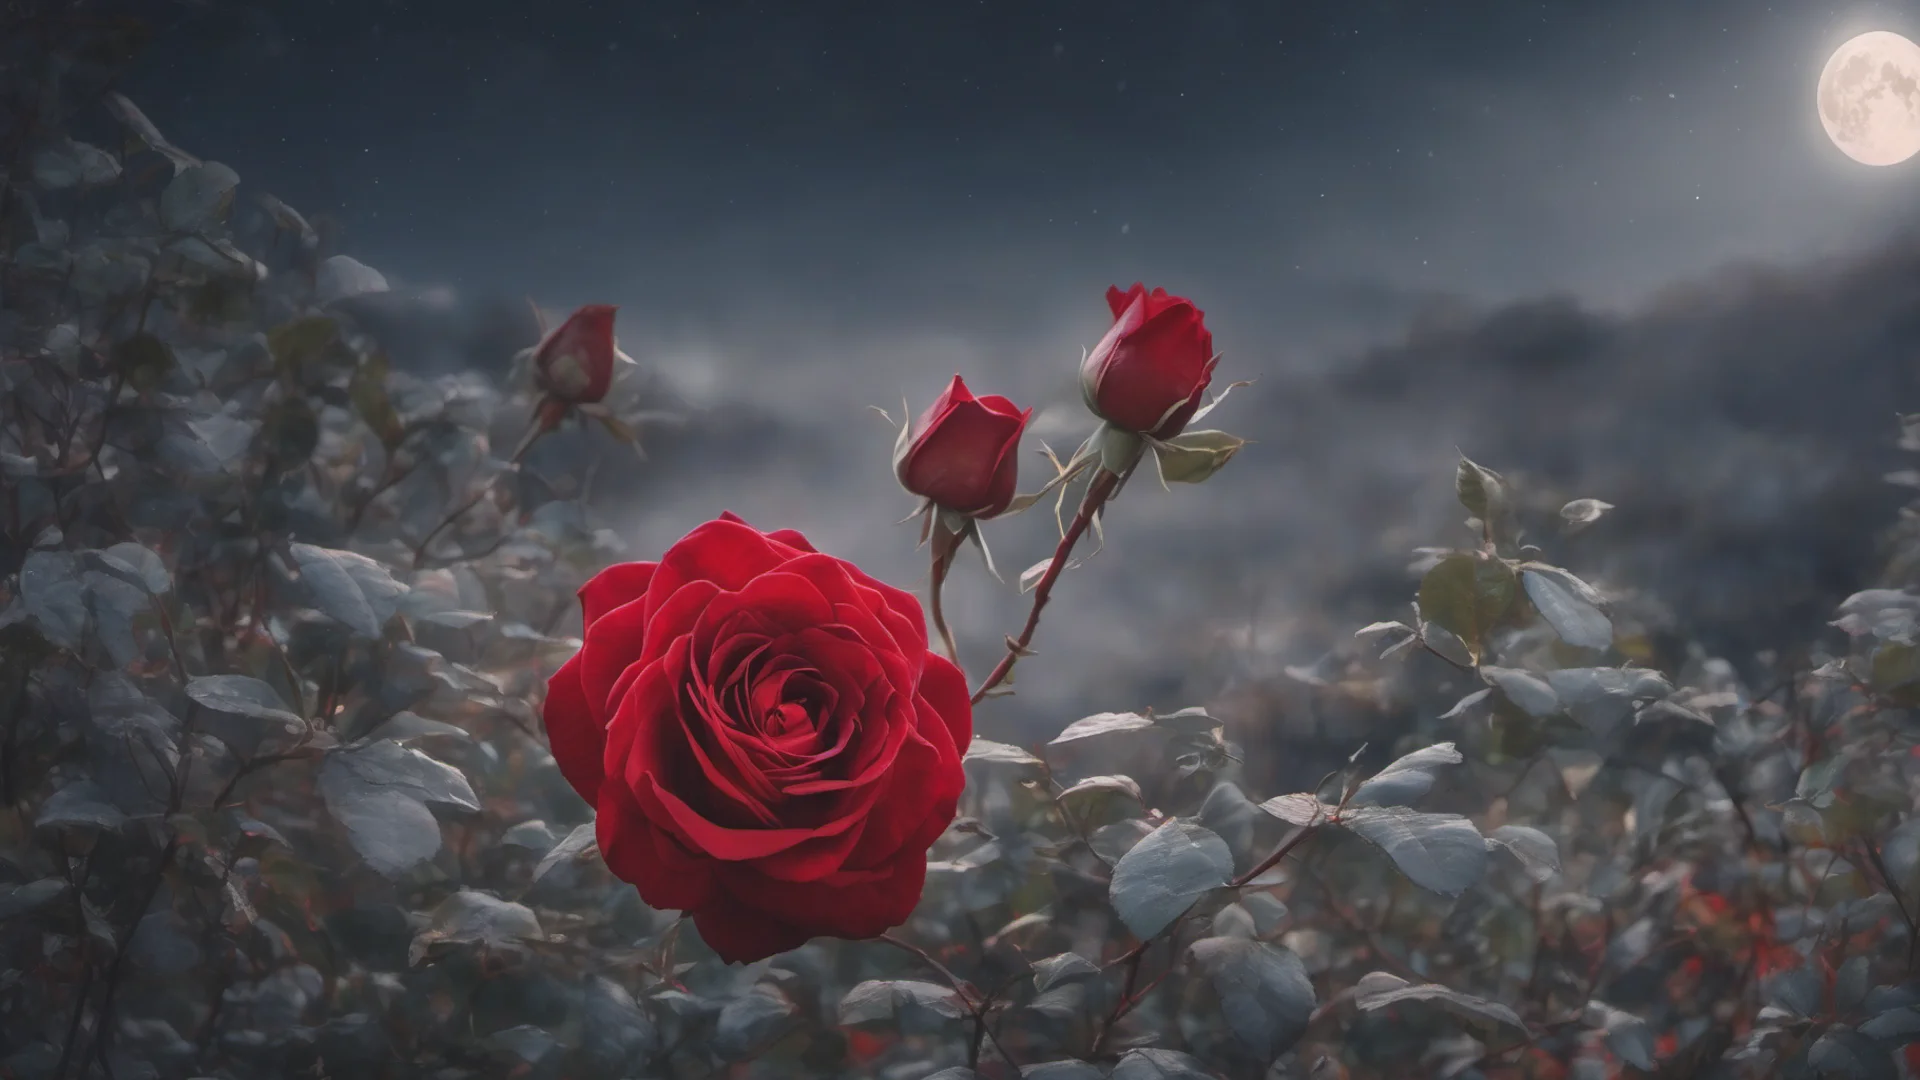 aia beautiful red rose under the moonlight amazing awesome portrait 2 wide